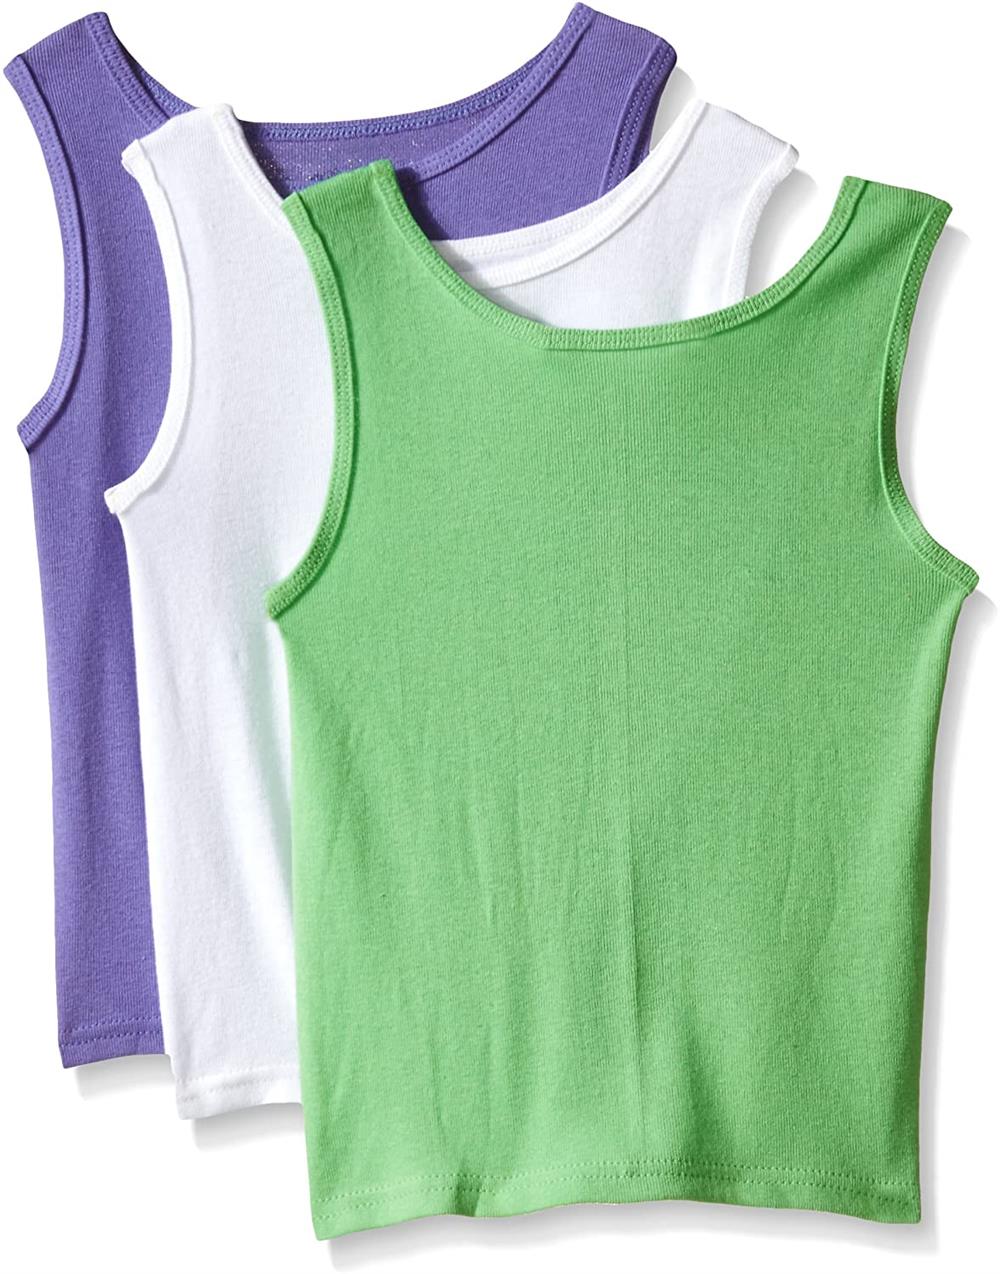 Fruit Of The Loom Girls 2T-4T Ribbed Tank Top - 3 Pack